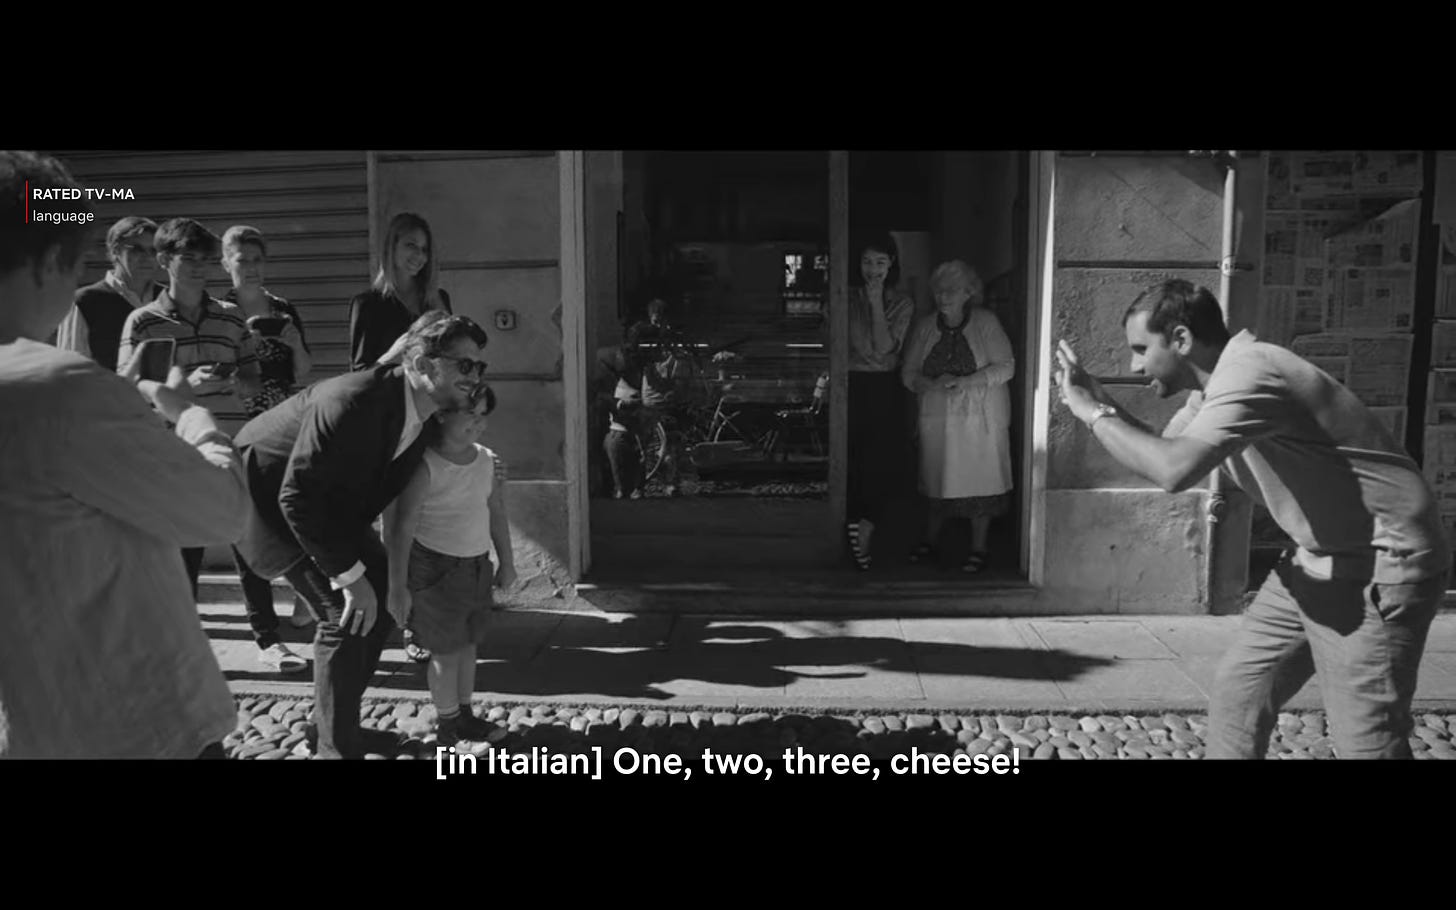 Master of None scene: Black and white film, Dev small Indian man taking photo of young Italian girl and famous Italian soccer player. The subtitle says "[in Italian] One, two three cheese!